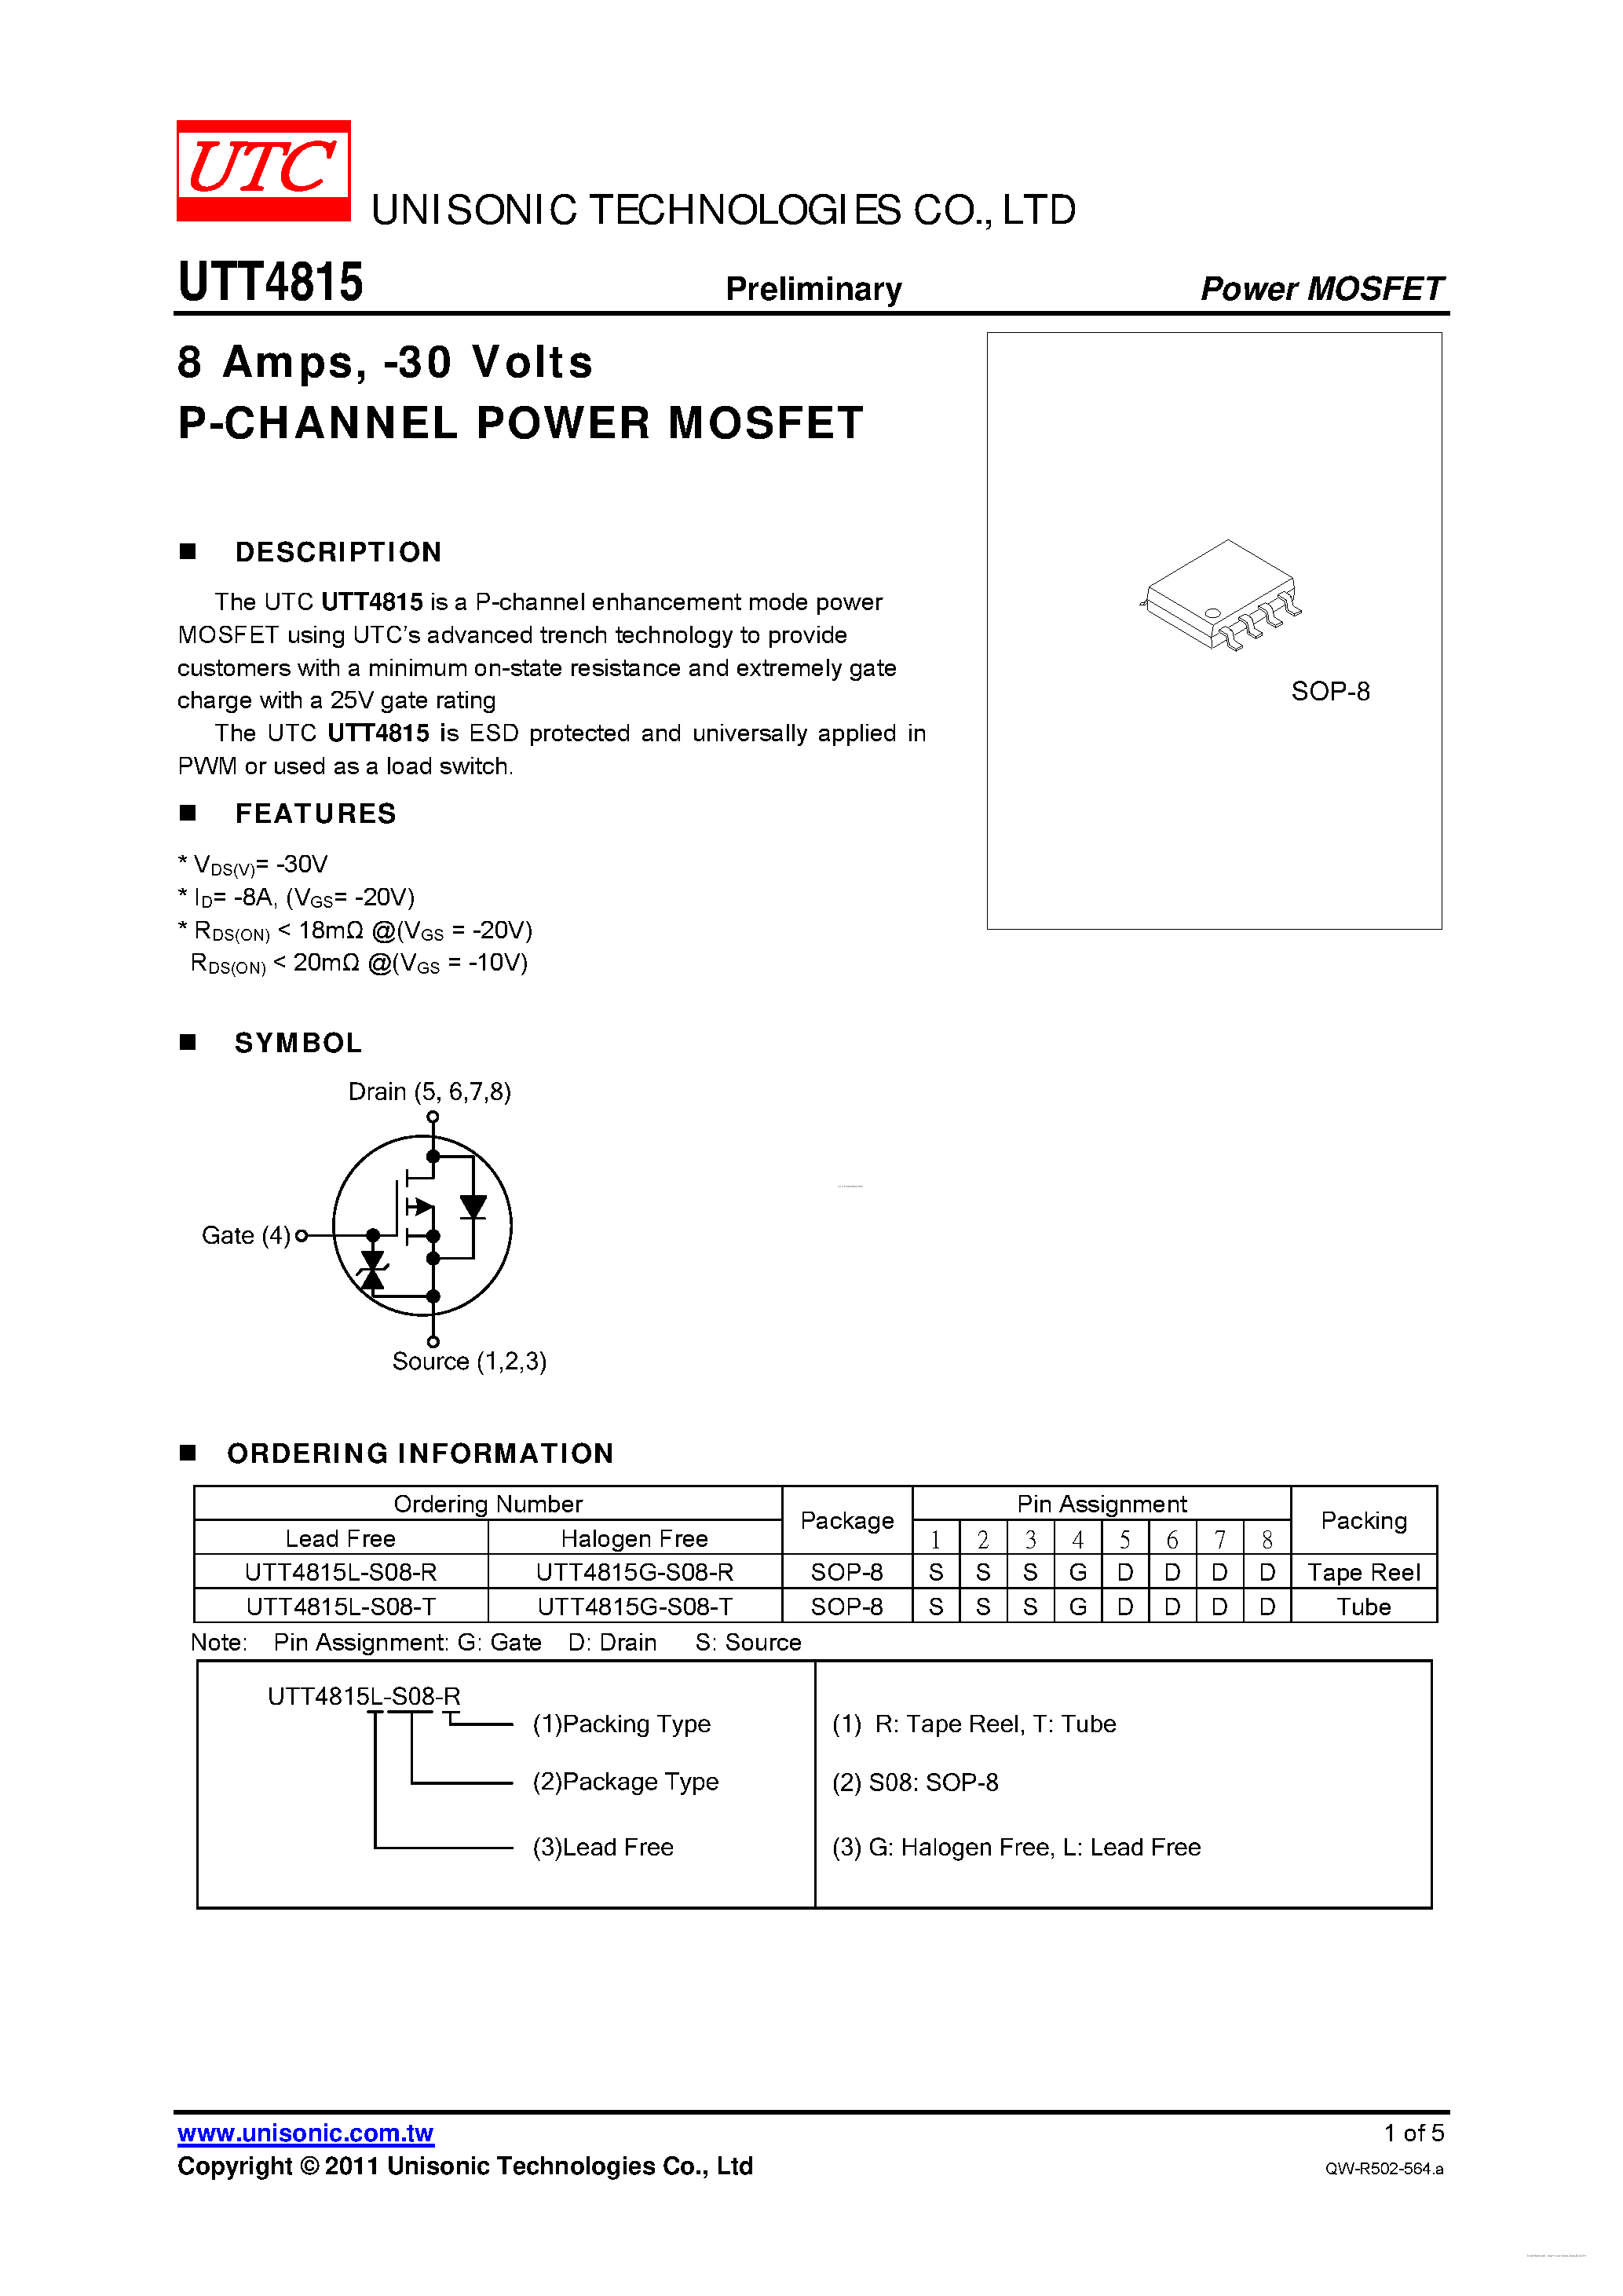 Даташит UTT4815 - P-CHANNEL POWER MOSFET страница 1